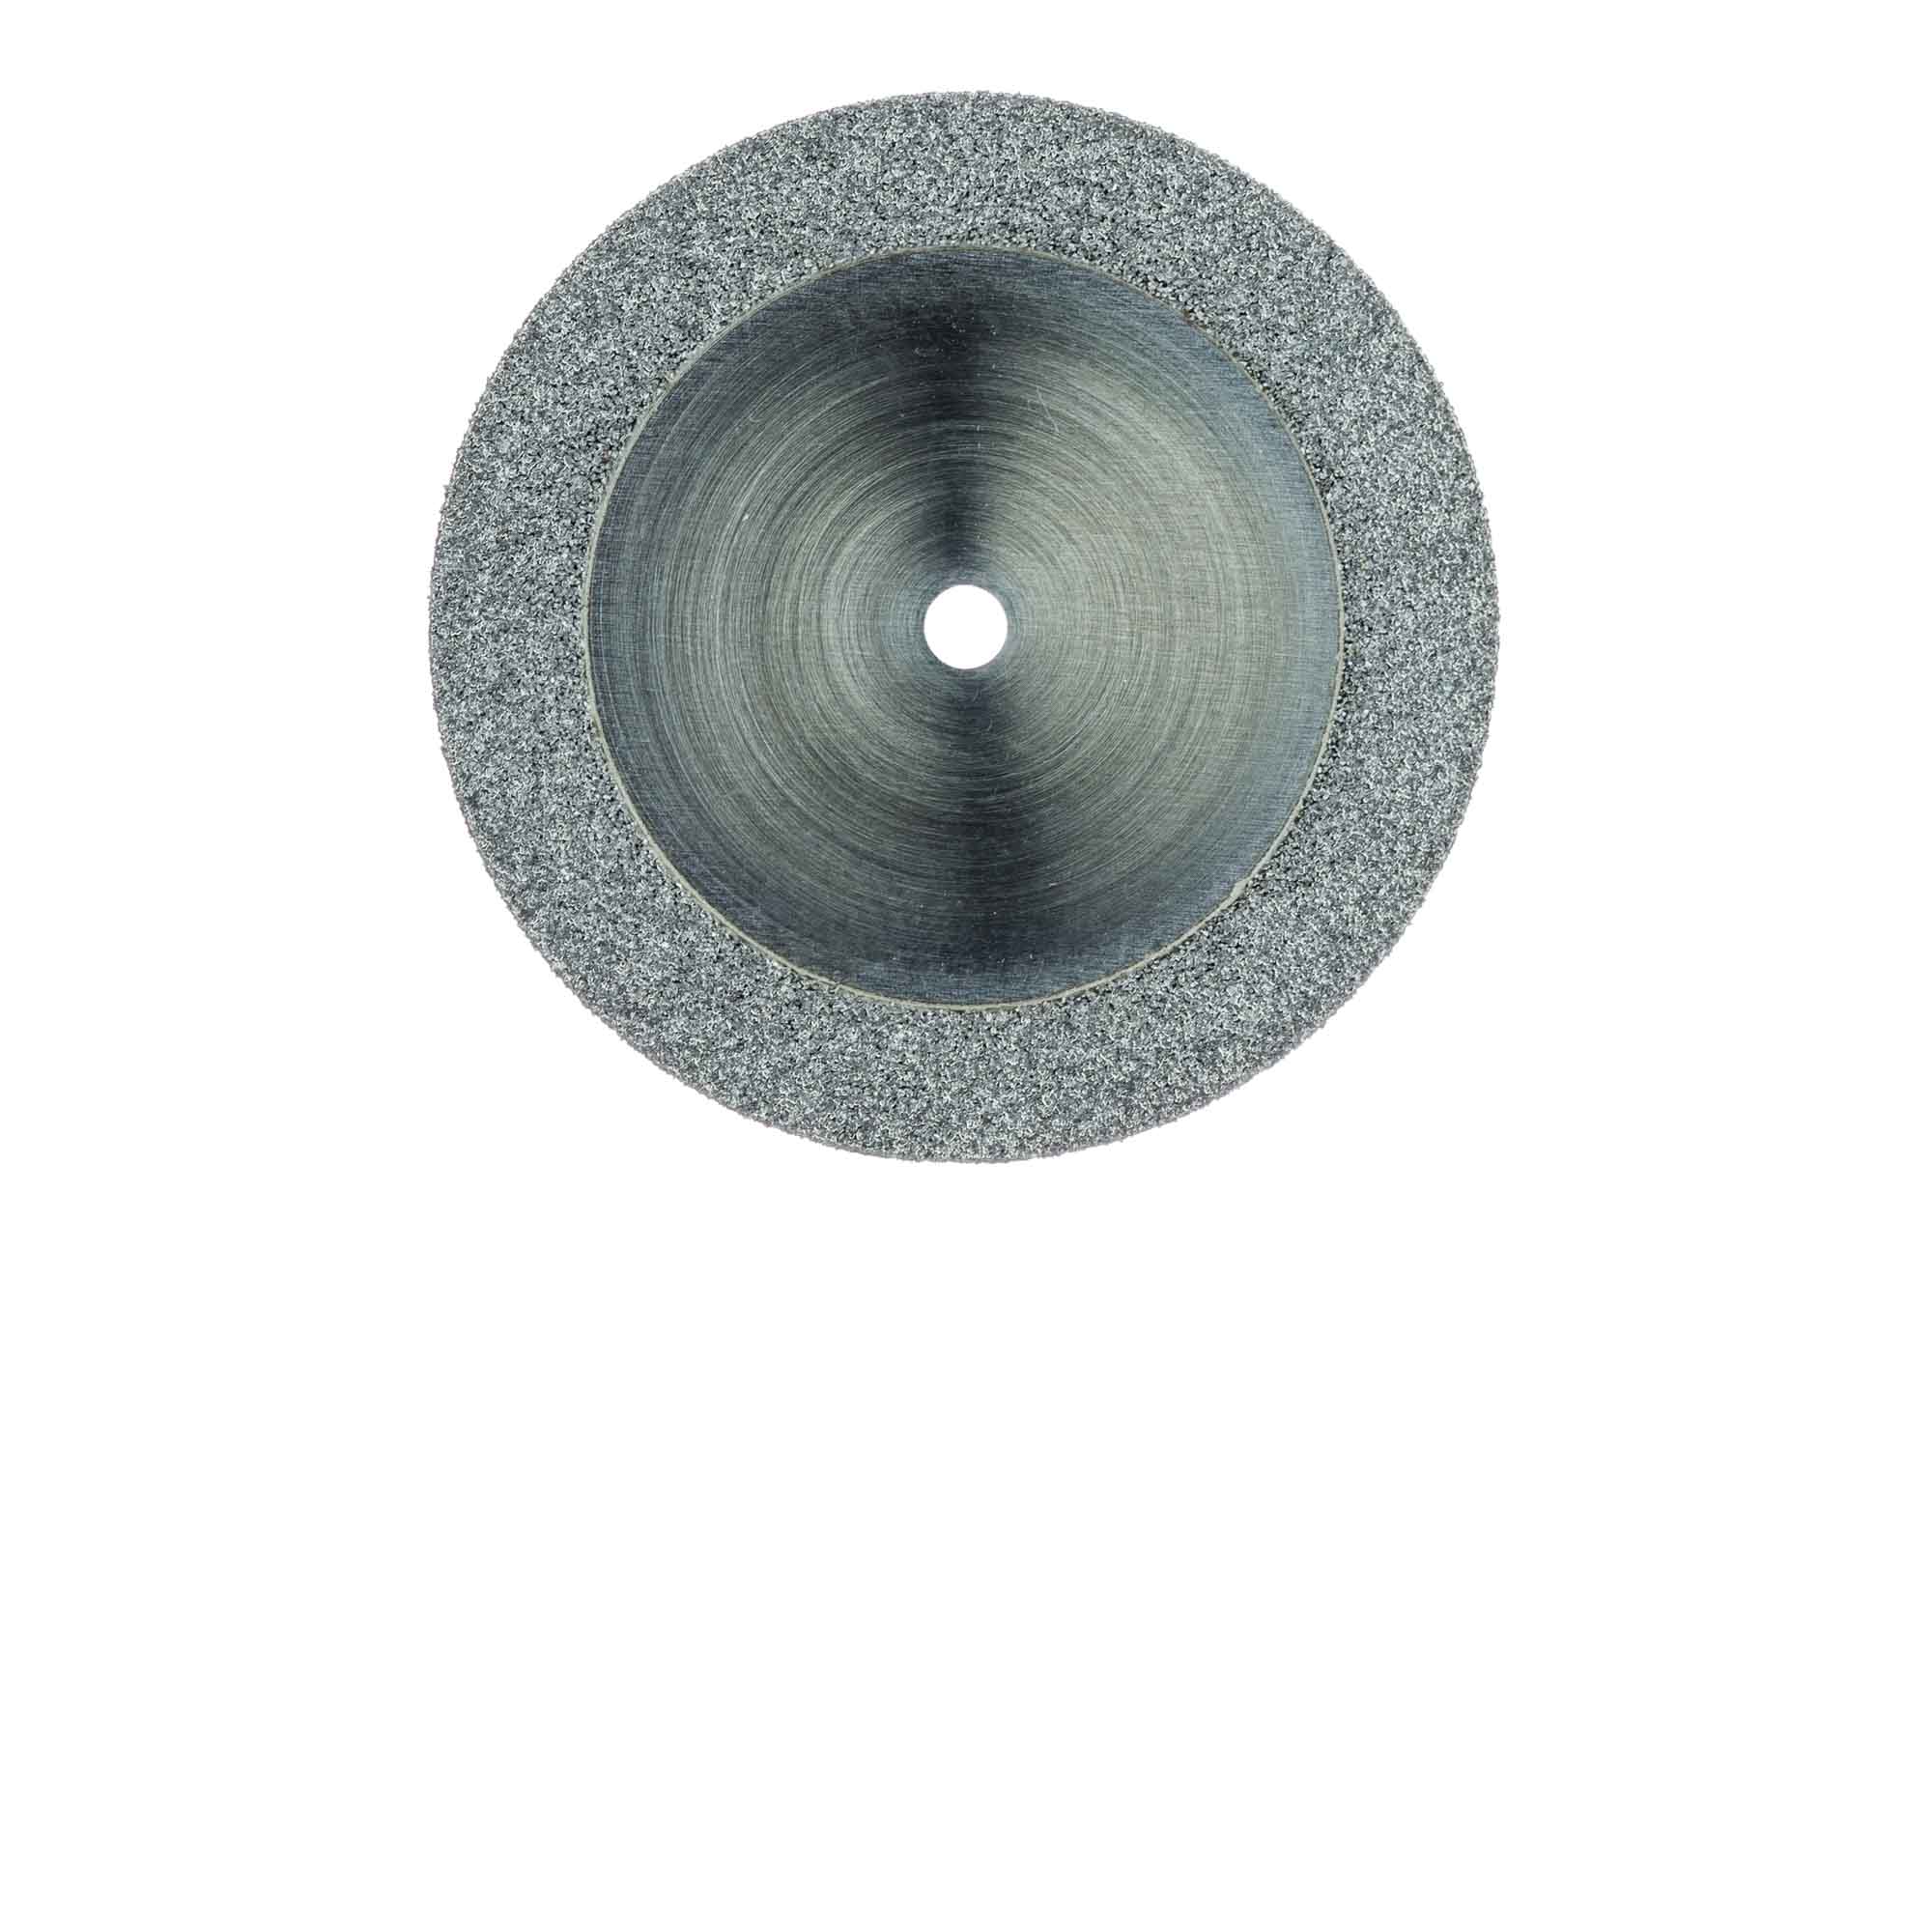 910D-190-UNM Diamond Disc, Edge, Double Sided, 0.5mm Thick, 19mm Ø, UNM